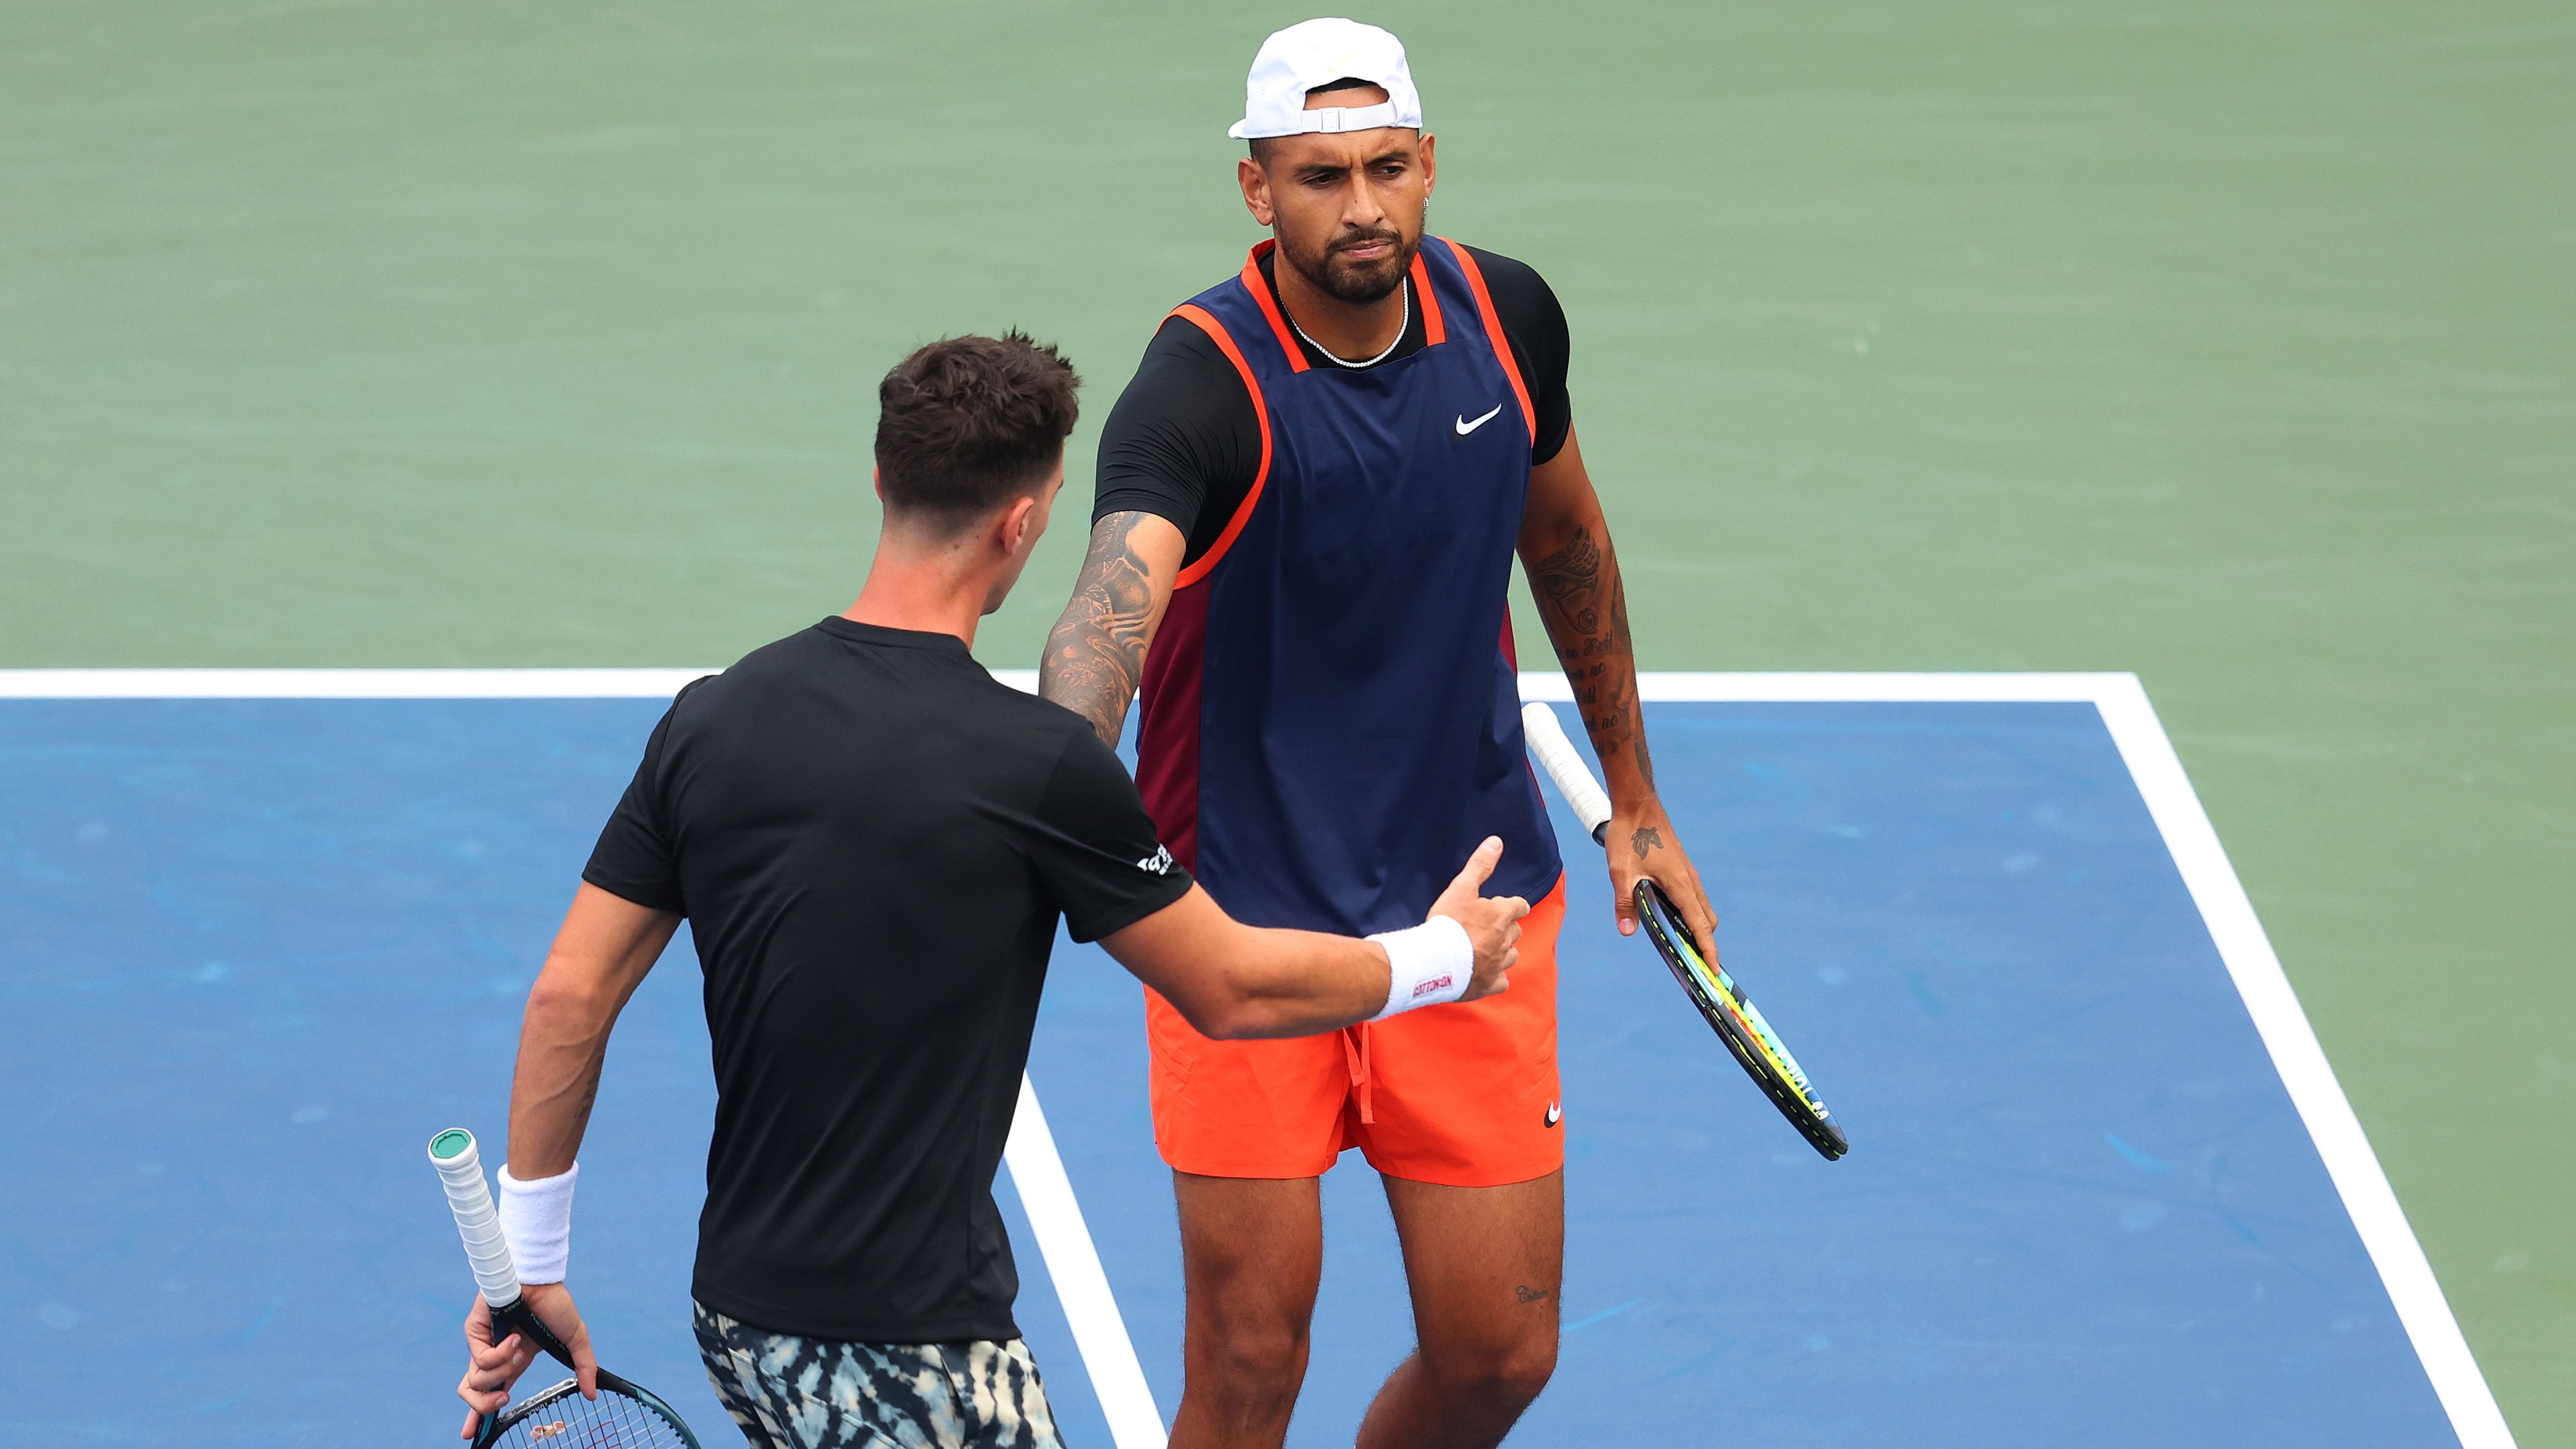 Aussie Special Ks ousted from US Open four points after outrageous Kyrgios celebration